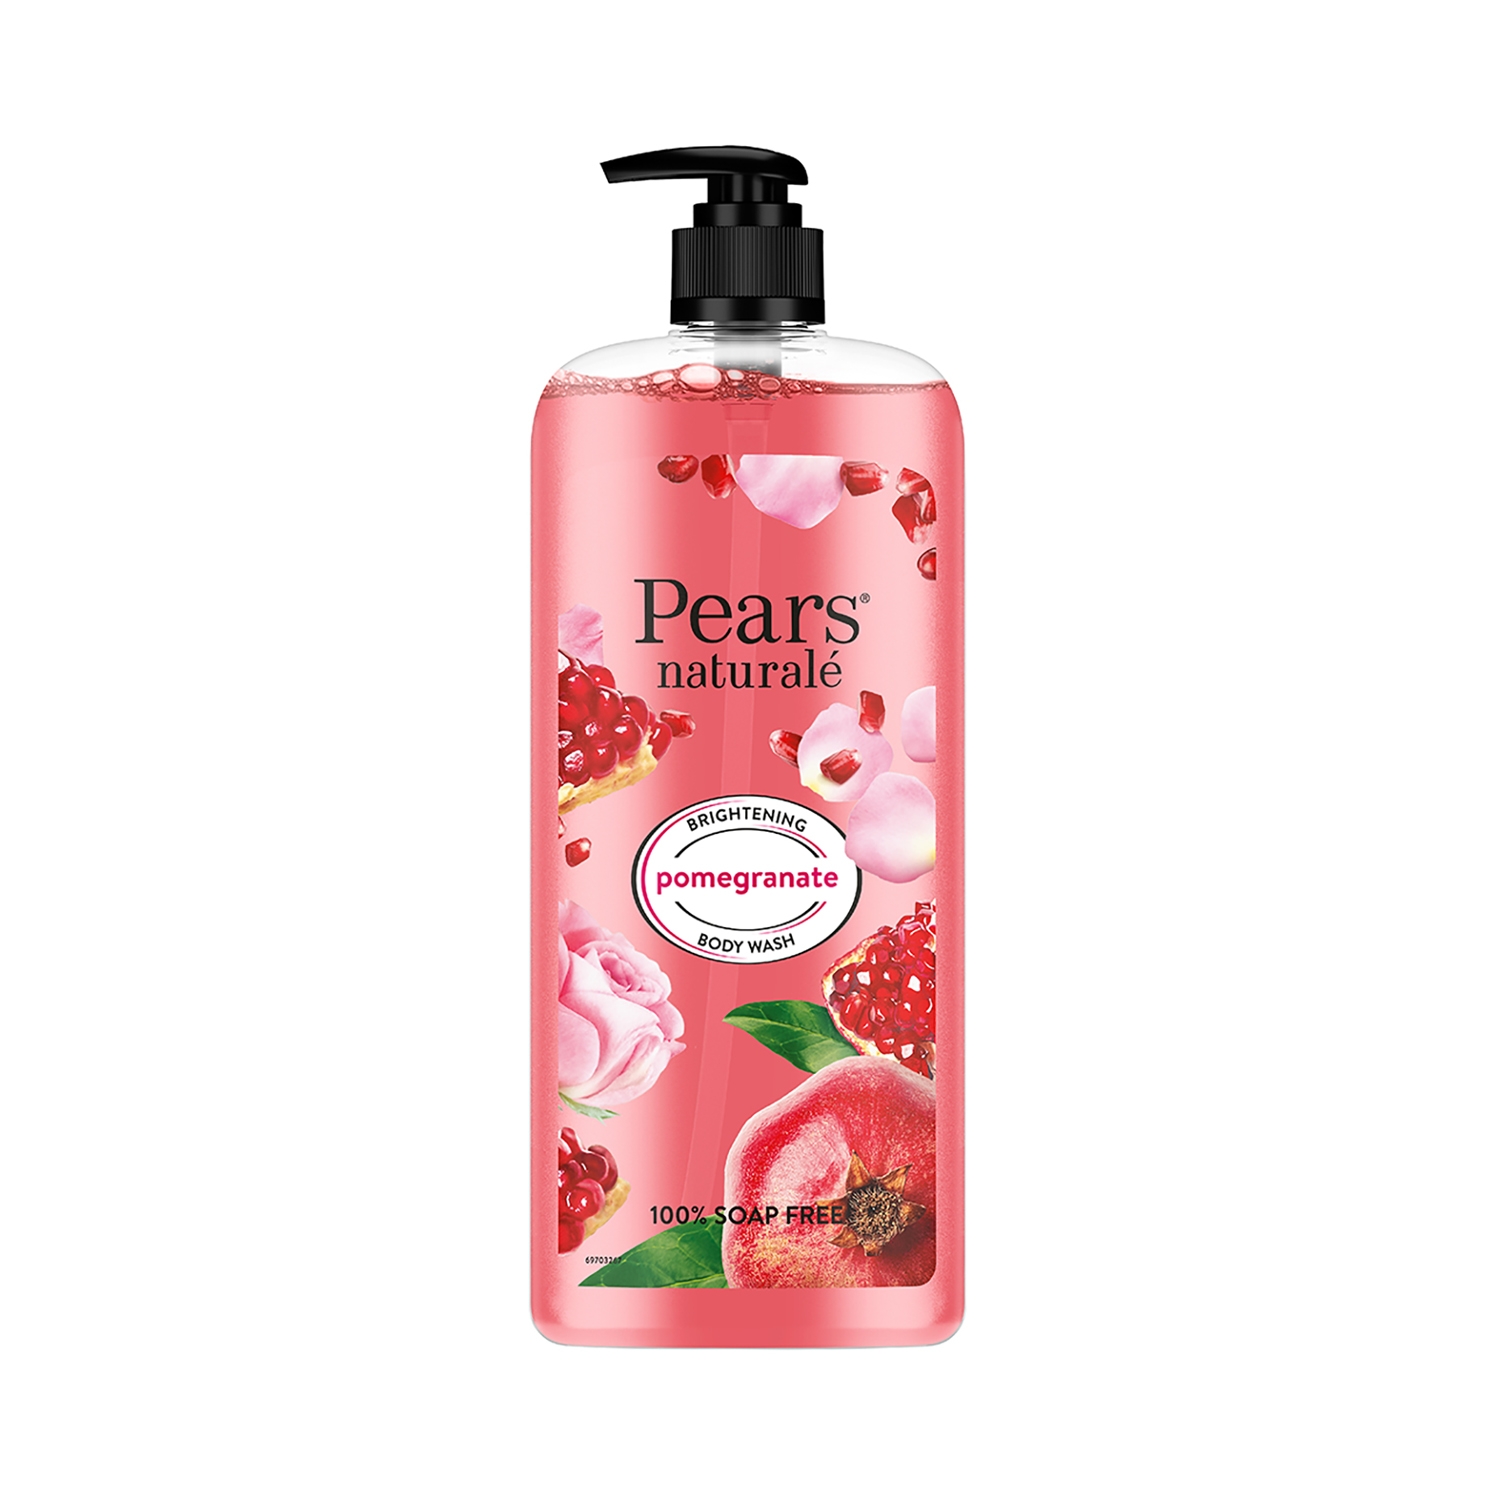 Pears | Pears Naturale Brightening Pomegranate Body Wash (750ml)